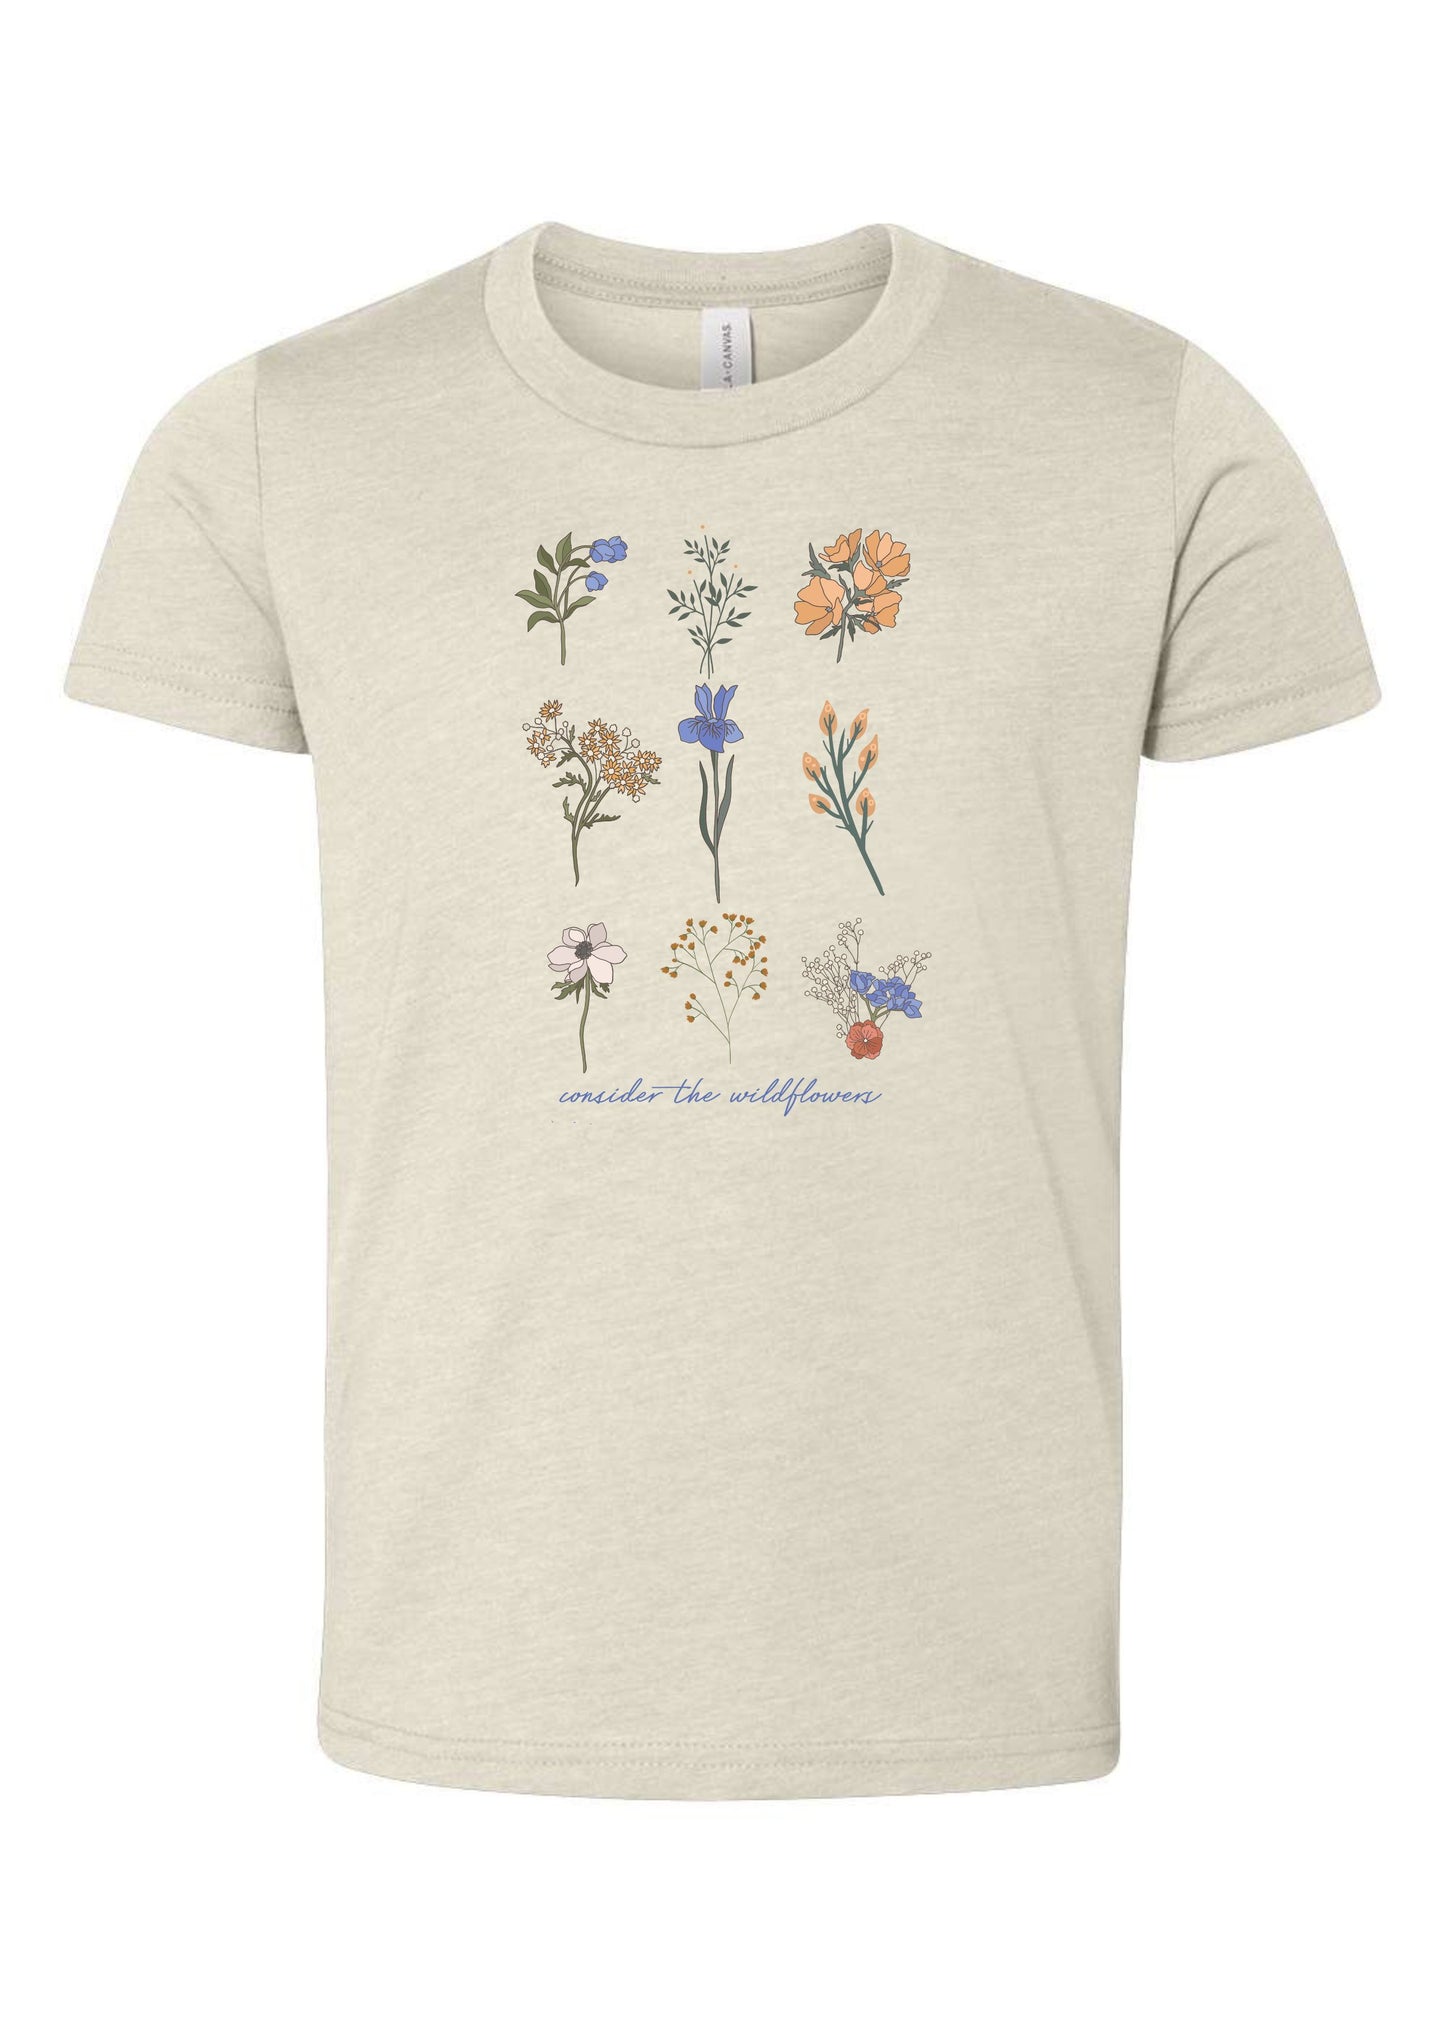 Consider The Wildflowers | Kids Tee-Kids Tees-Sister Shirts-Sister Shirts, Cute & Custom Tees for Mama & Littles in Trussville, Alabama.